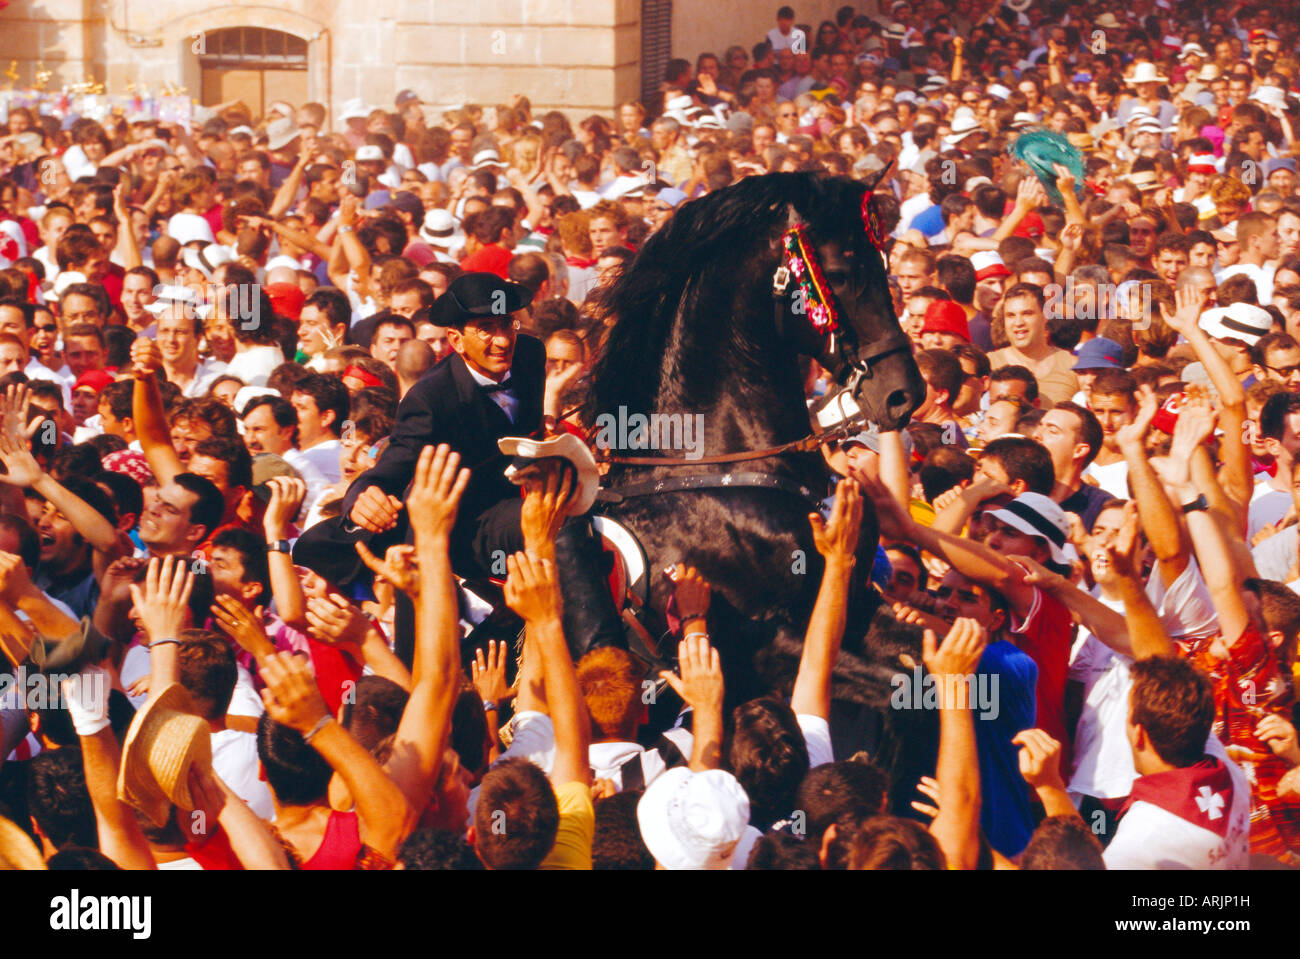 Rider on a rearing horse among the crowds during Sant Joans festival, Ciutadella, Minorca, Spain Stock Photo